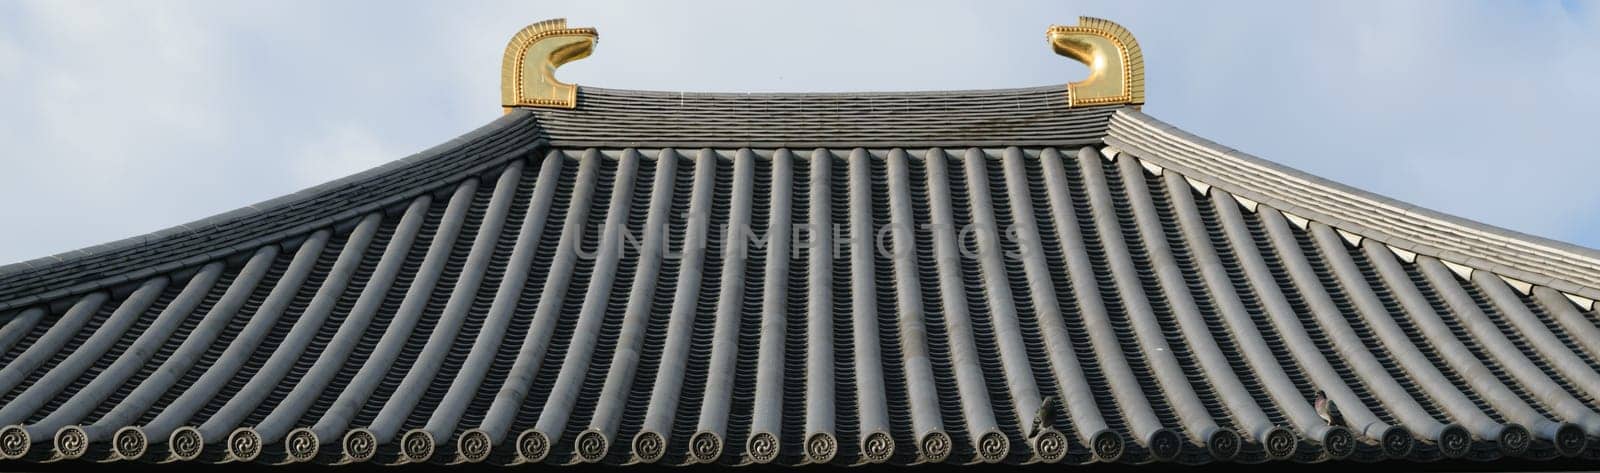 Traditional Japanese Temple Roof with Golden Decorations by jameshumble